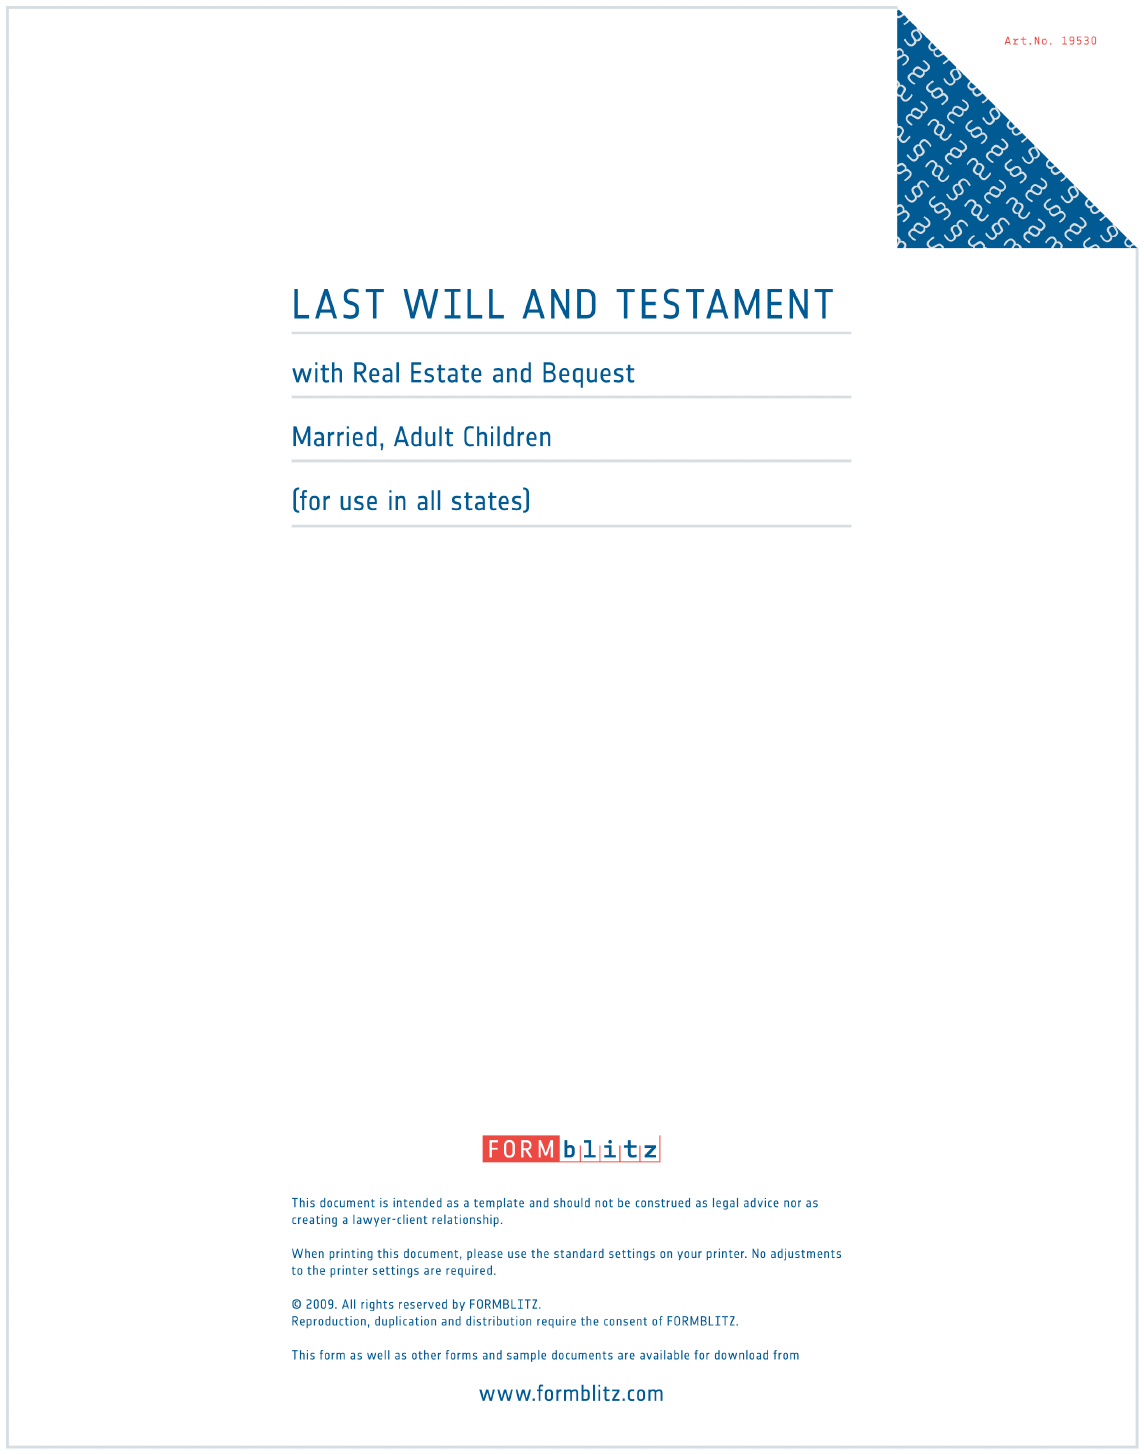 massachusetts-last-will-and-testament-template-download-in-word-google-docs-template